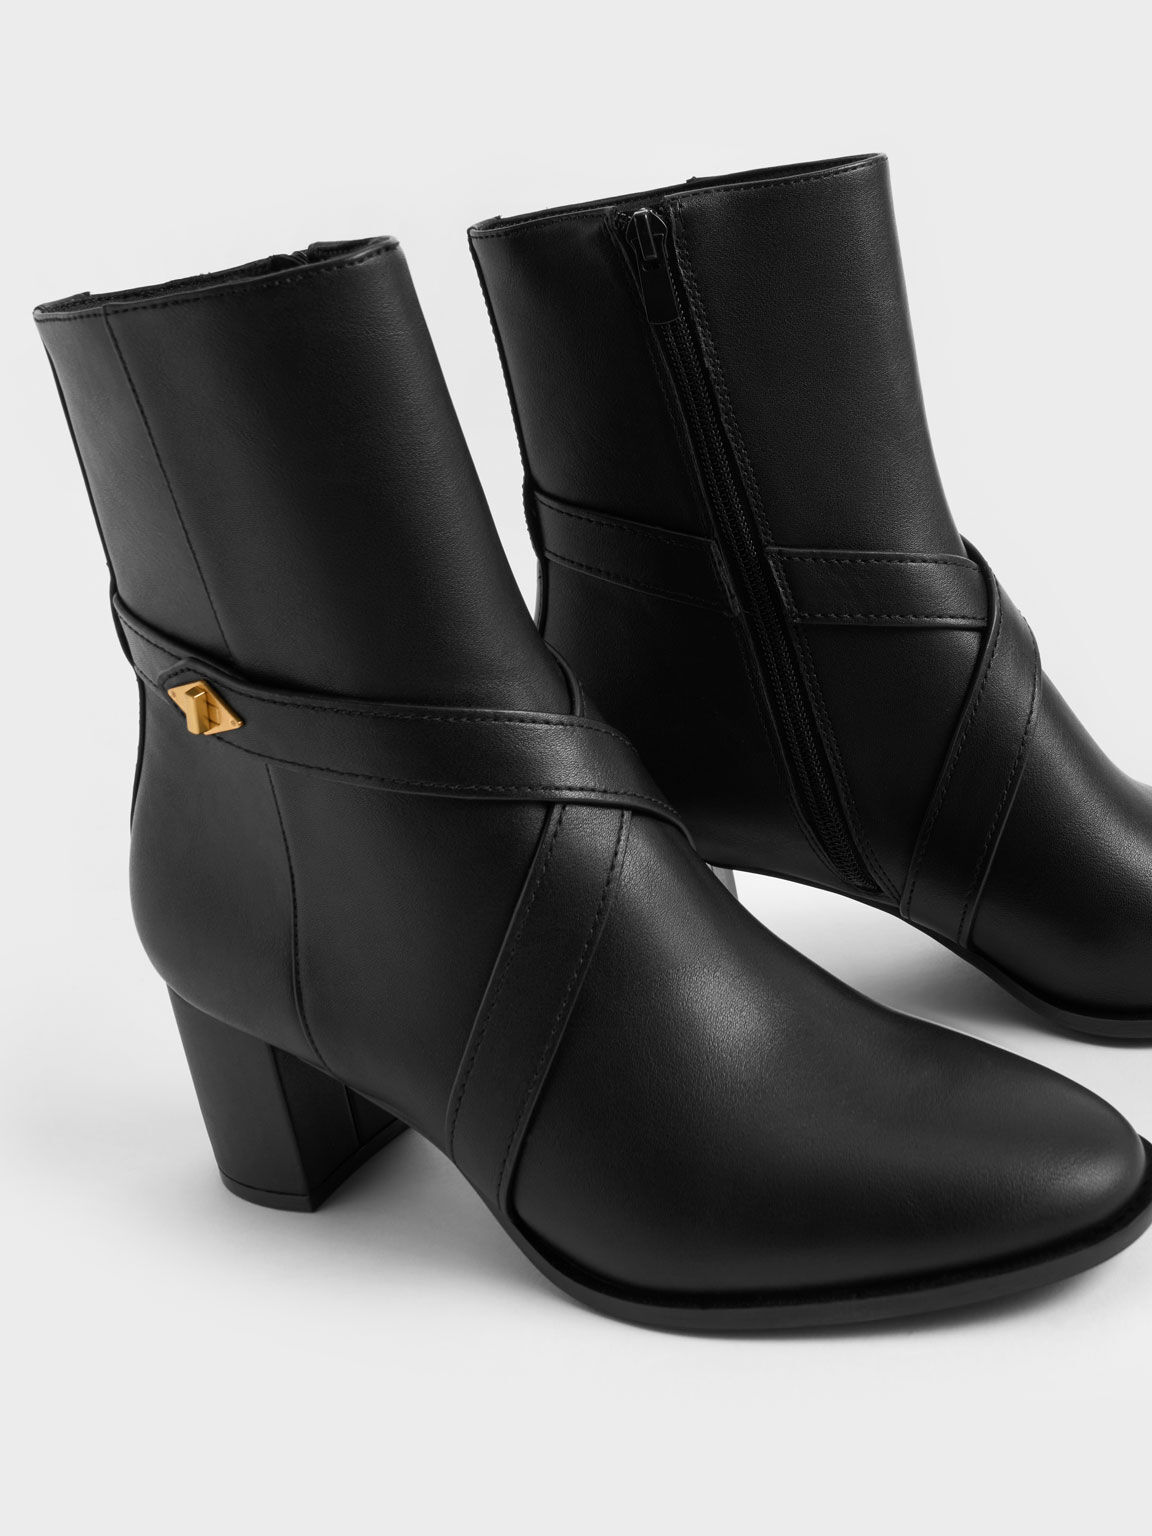 Metallic Accent Crossover Ankle Boots, Black, hi-res